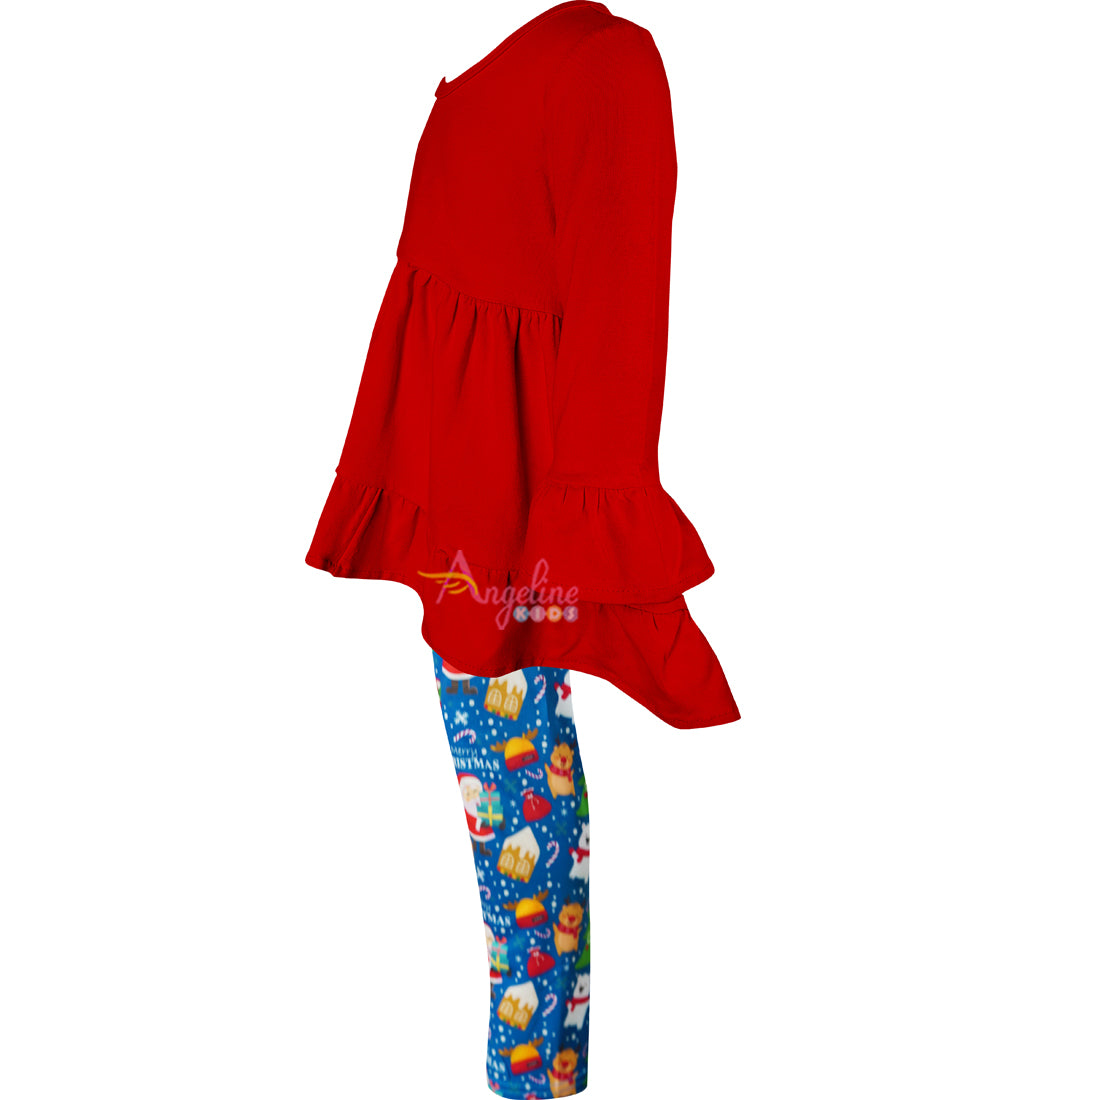 Girls Christmas Santa Gingerbread Scarf Outfit - Red Navy - Angeline Kids